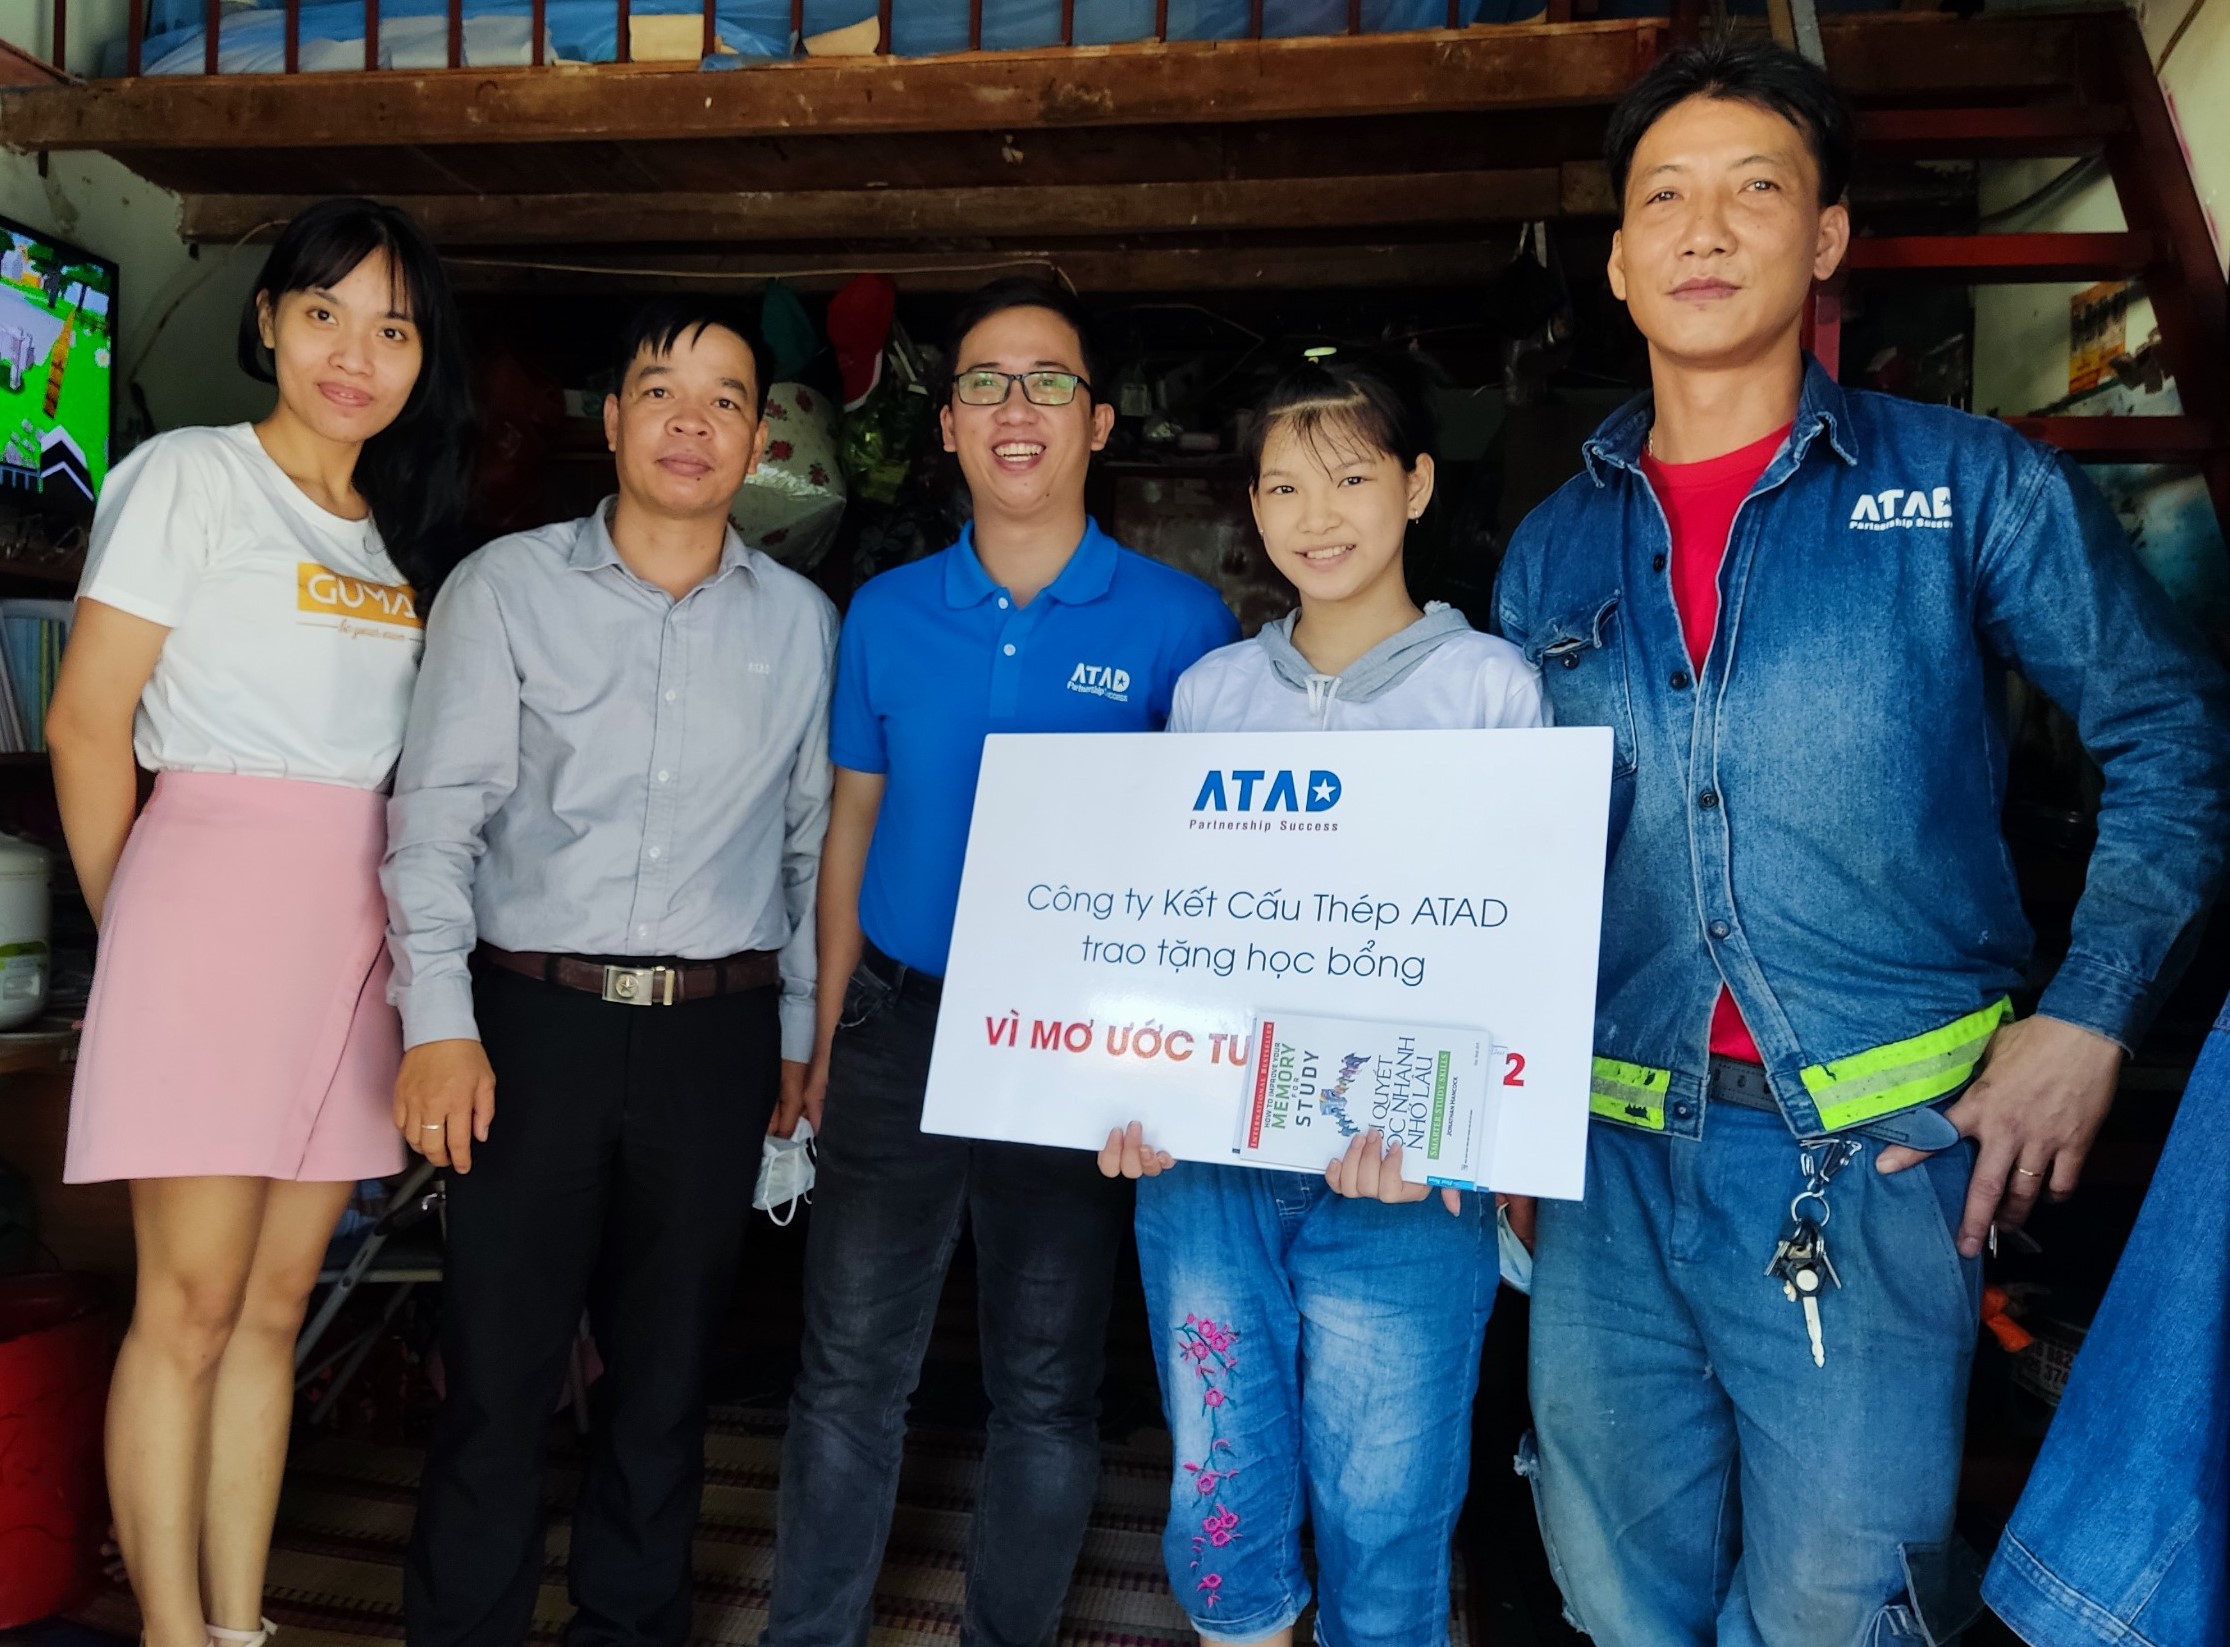 ATAD presented scholarships to employees' children in need at ATAD factories 2